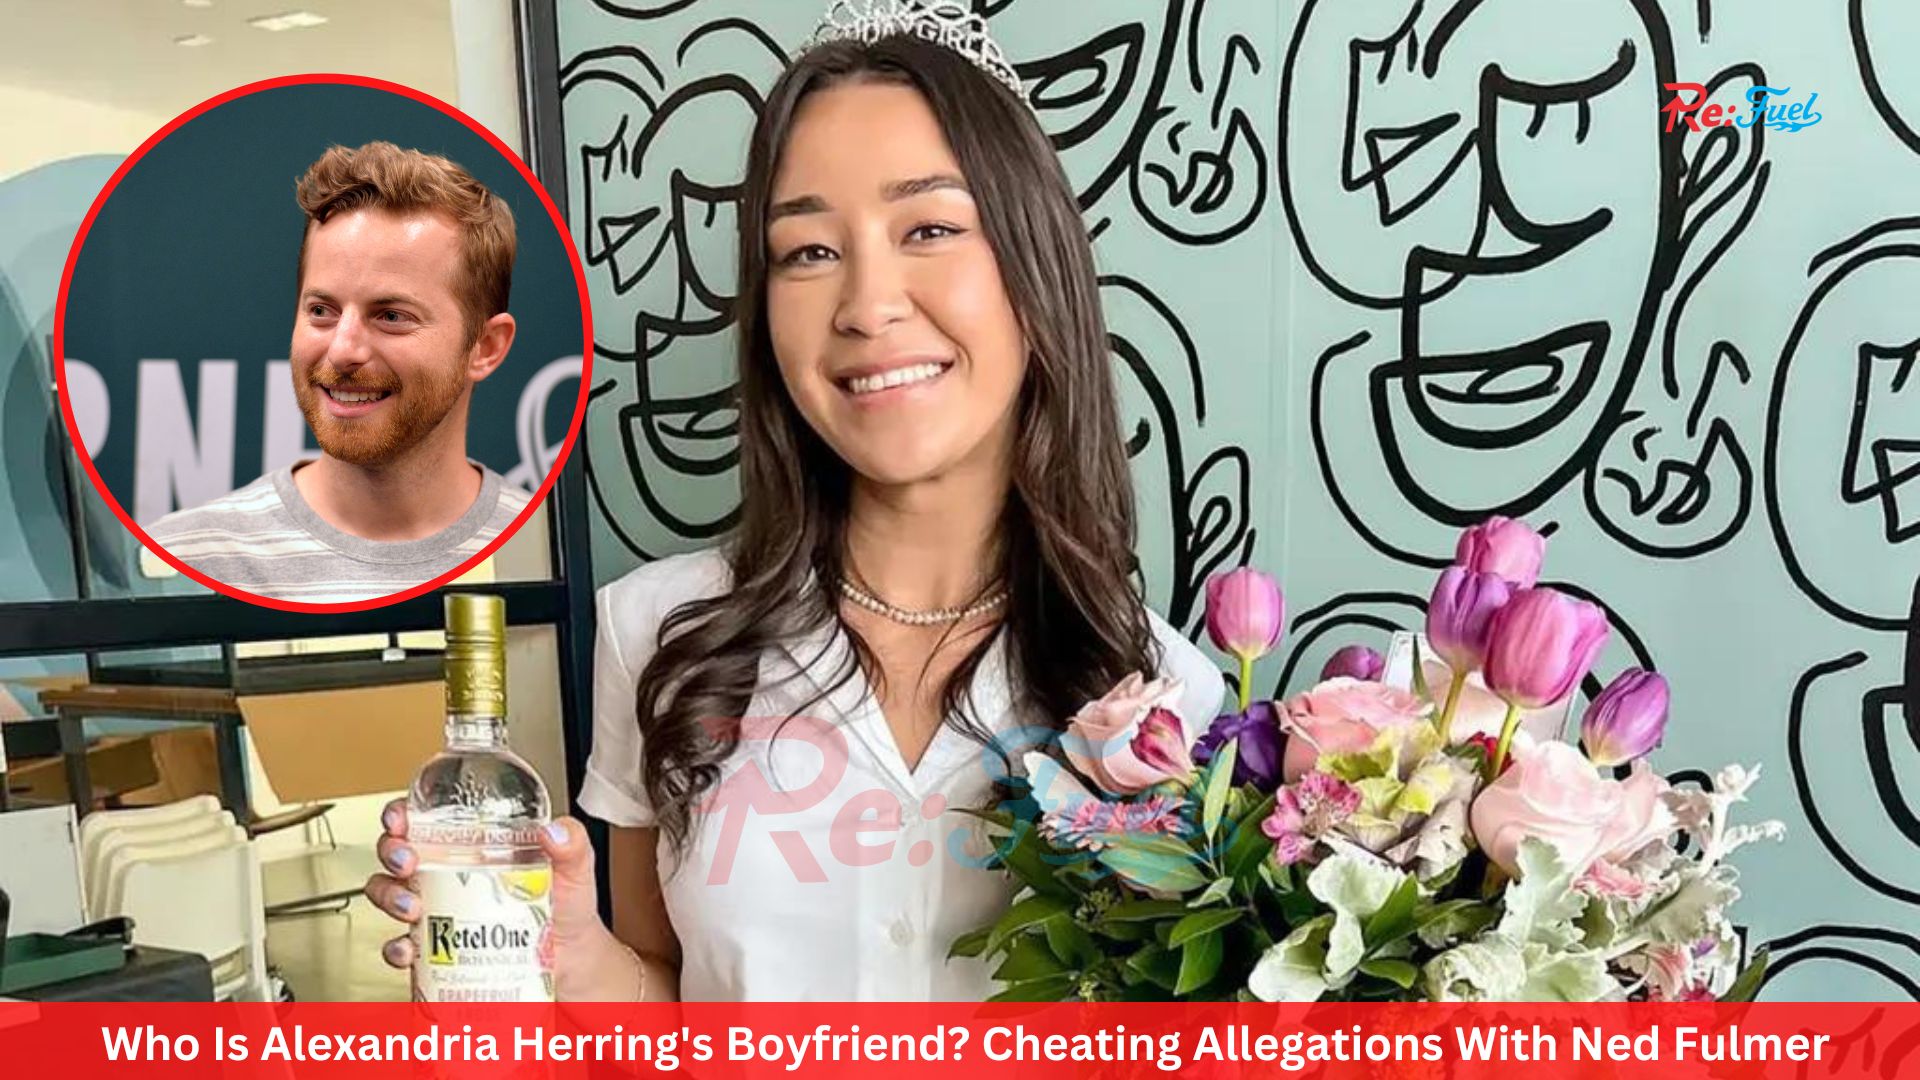 Who Is Alexandria Herring's Boyfriend? Cheating Allegations With Ned Fulmer